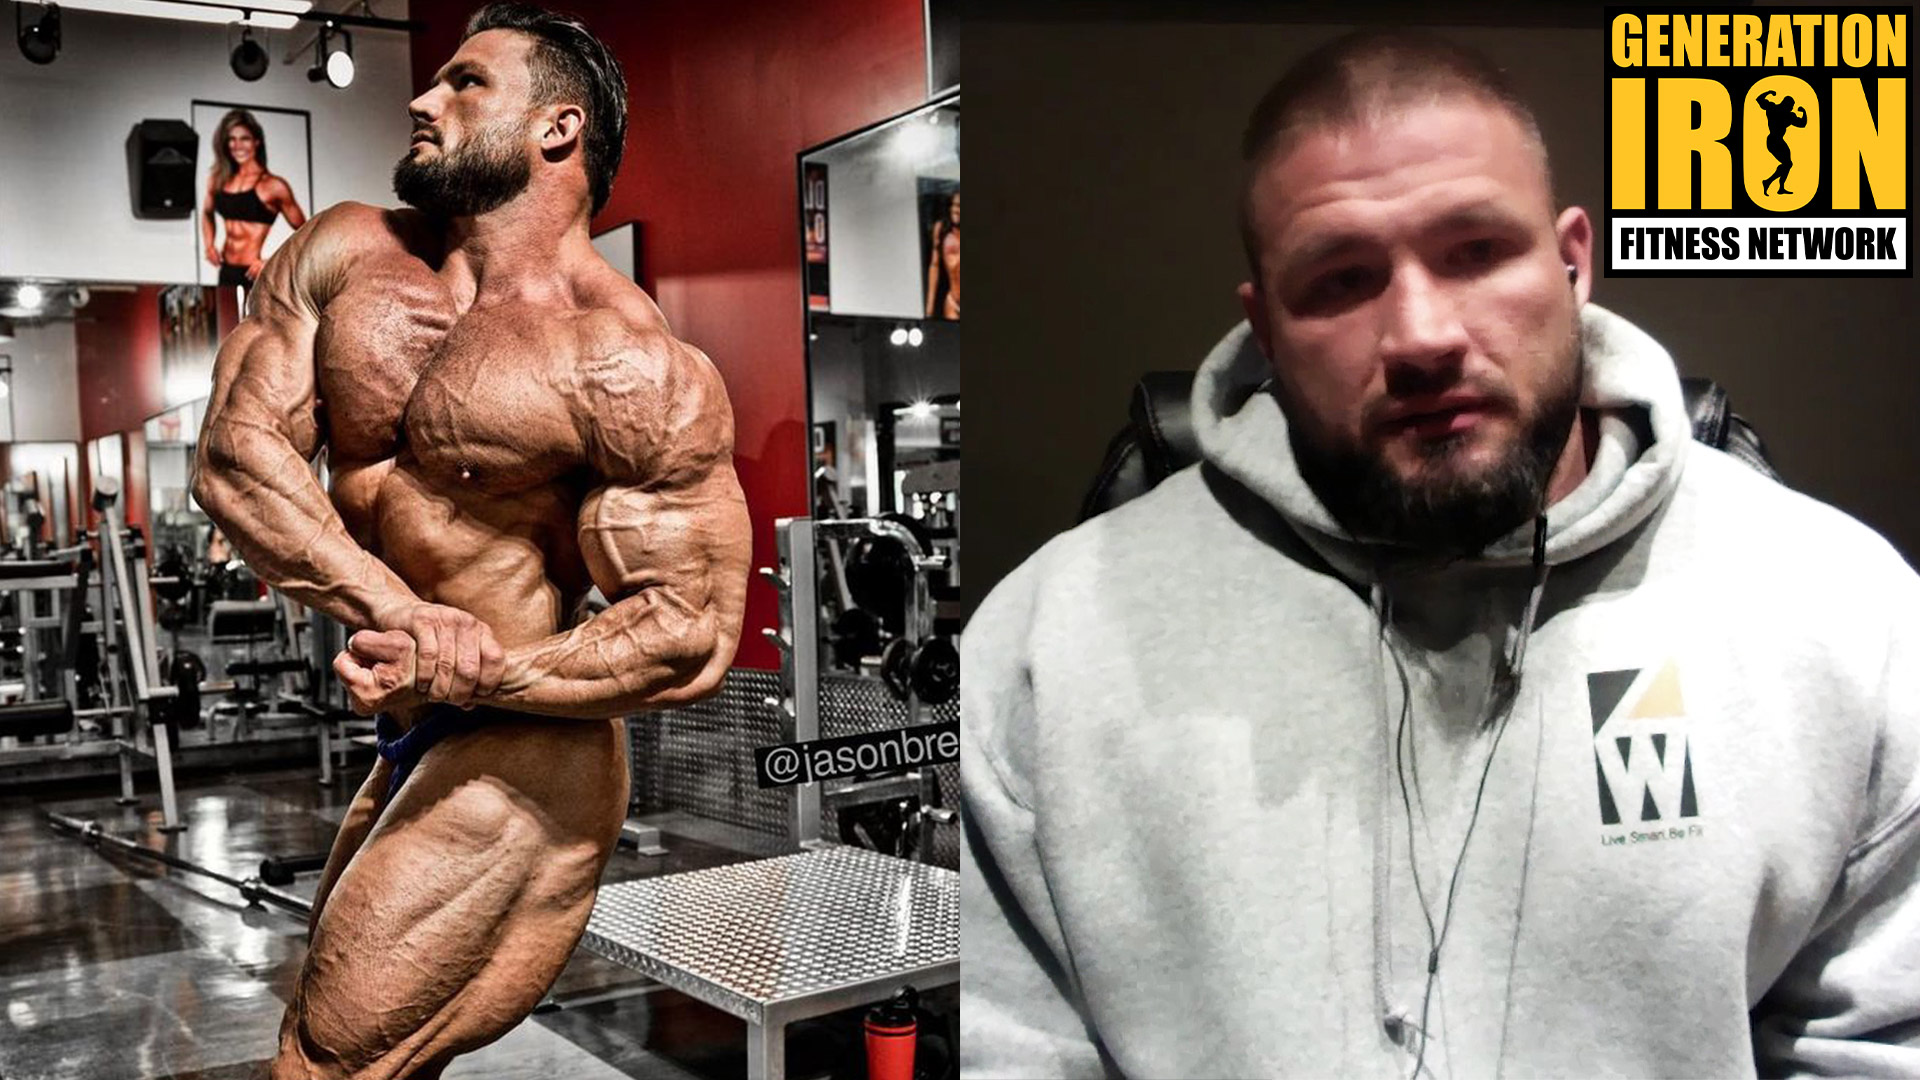 Zane Watson: Bodybuilding Doesn’t Have To Be 24/7 And 365 Days A Year